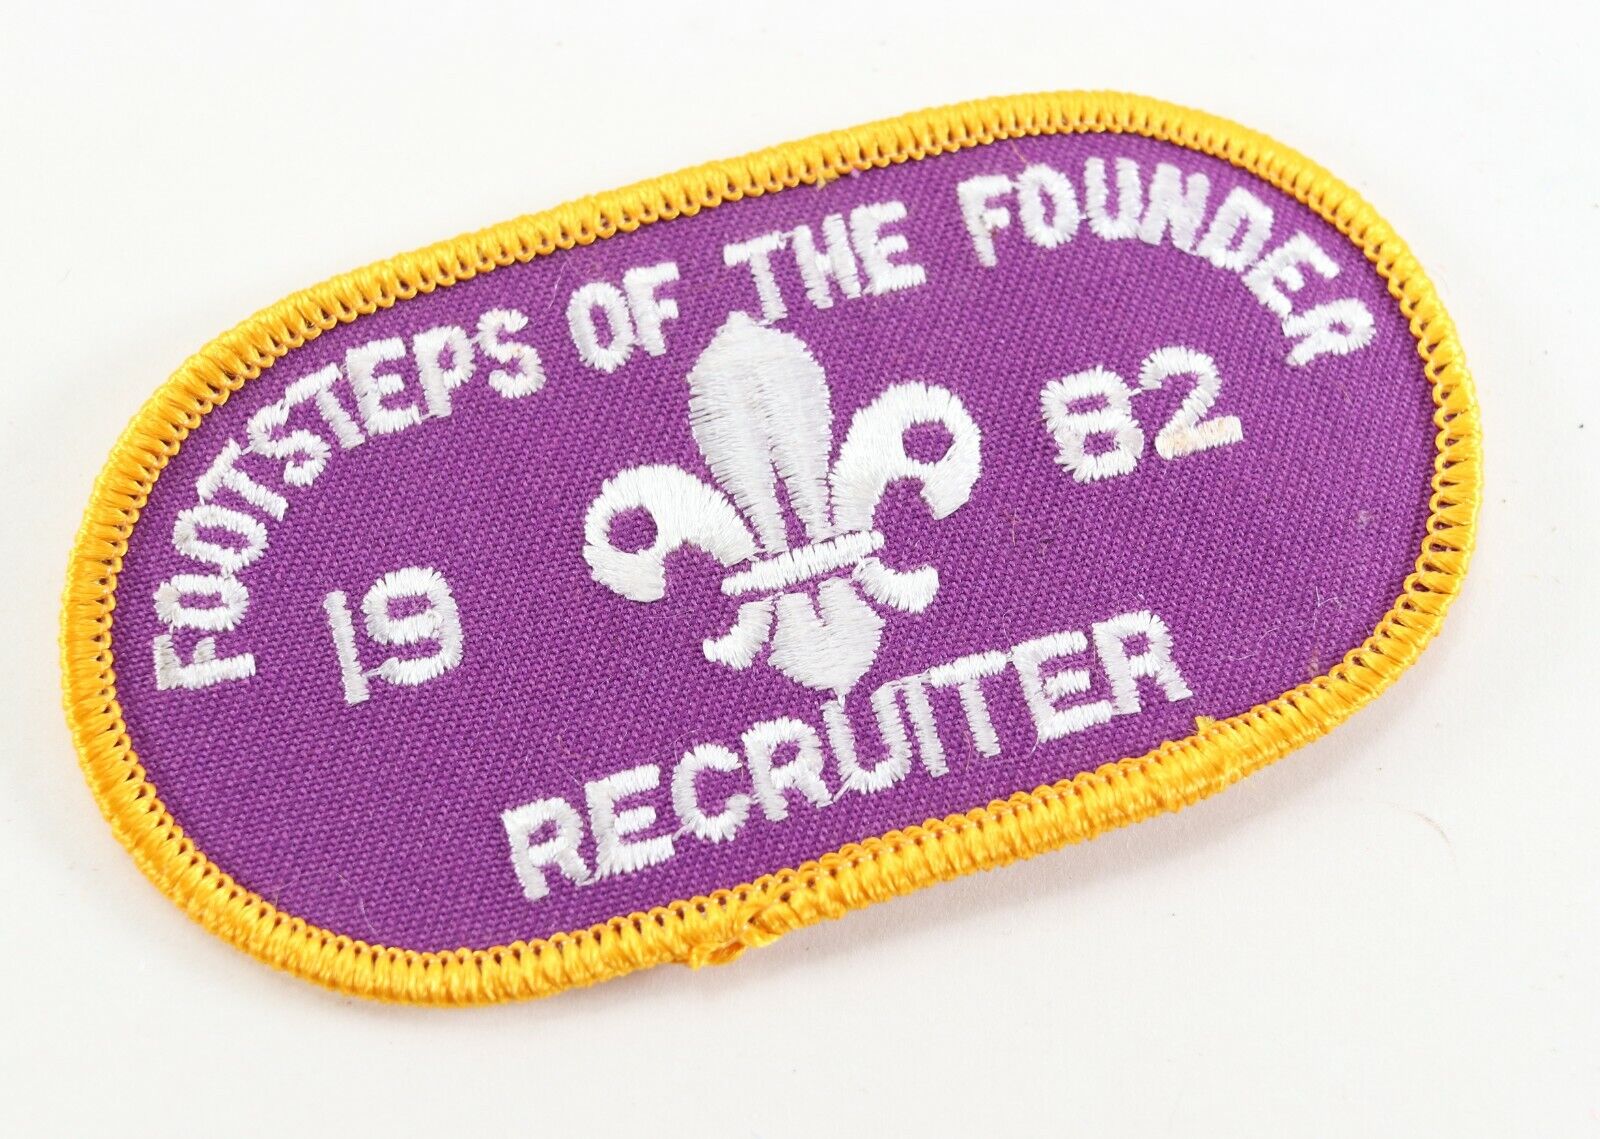 Vintage 1982 Footsteps of the Founder Recruiter Boy Scout BSA Camp Patch